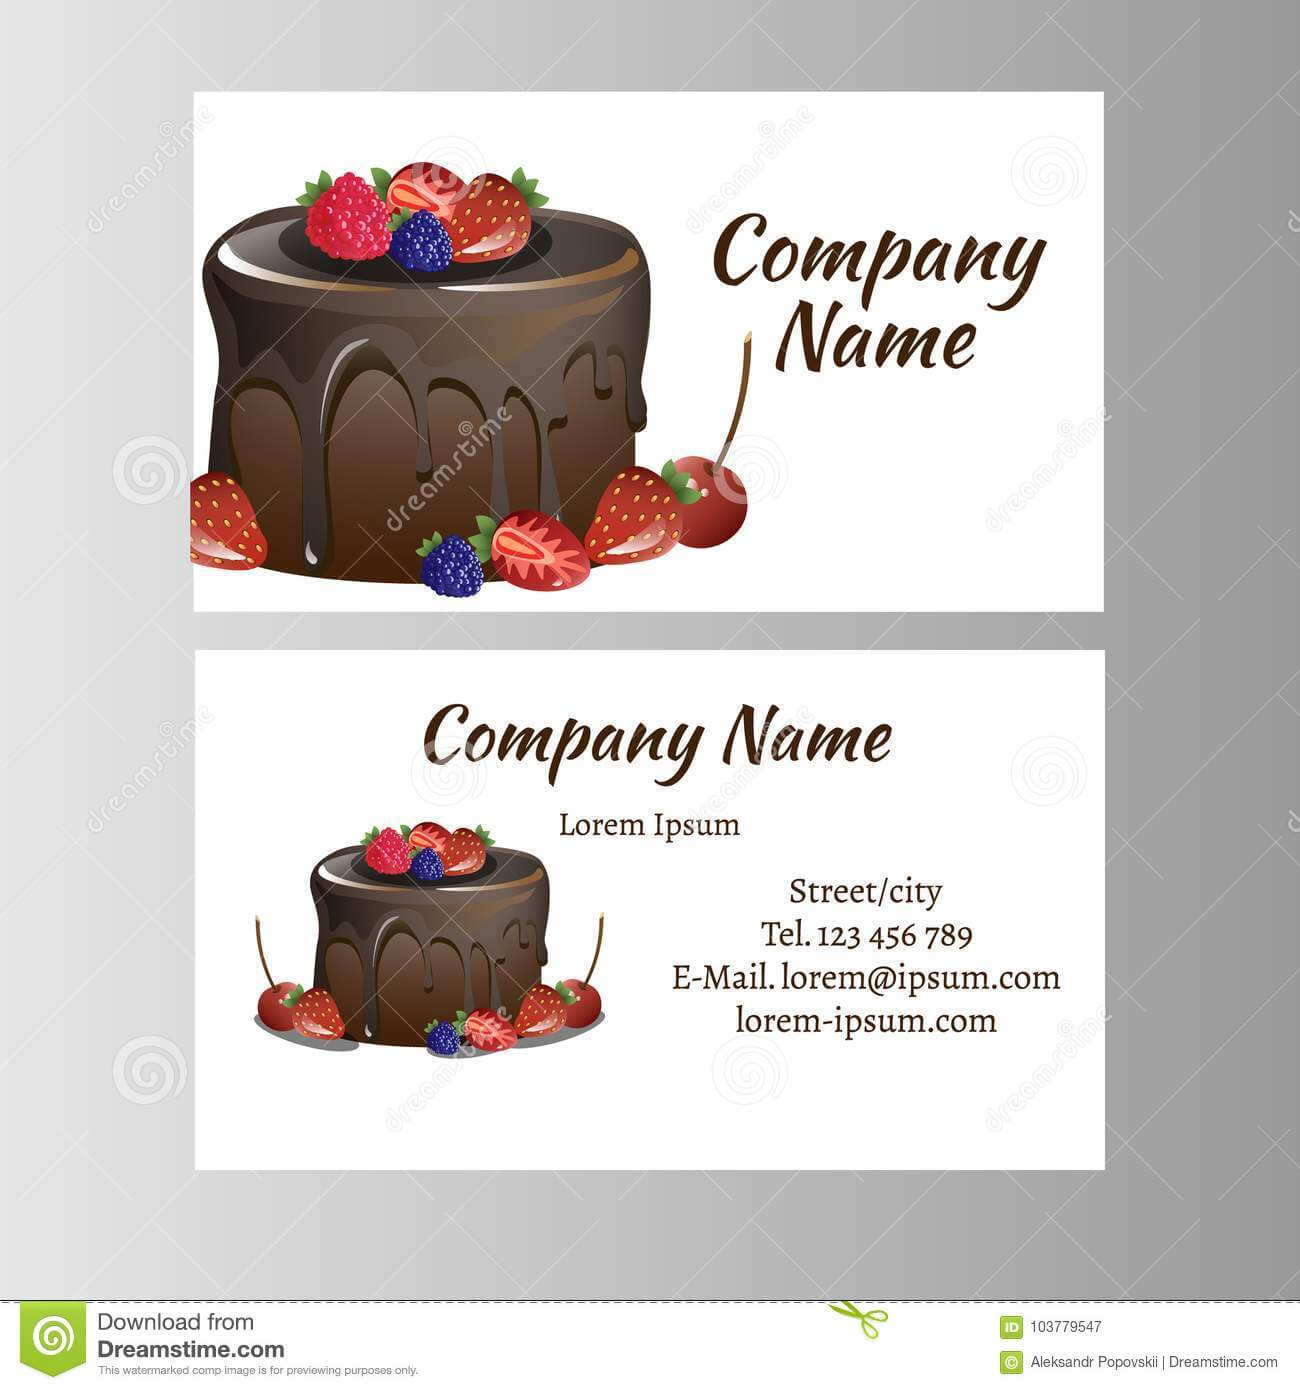 Business Card Template For Bakery Business. Stock Vector In Cake Business Cards Templates Free